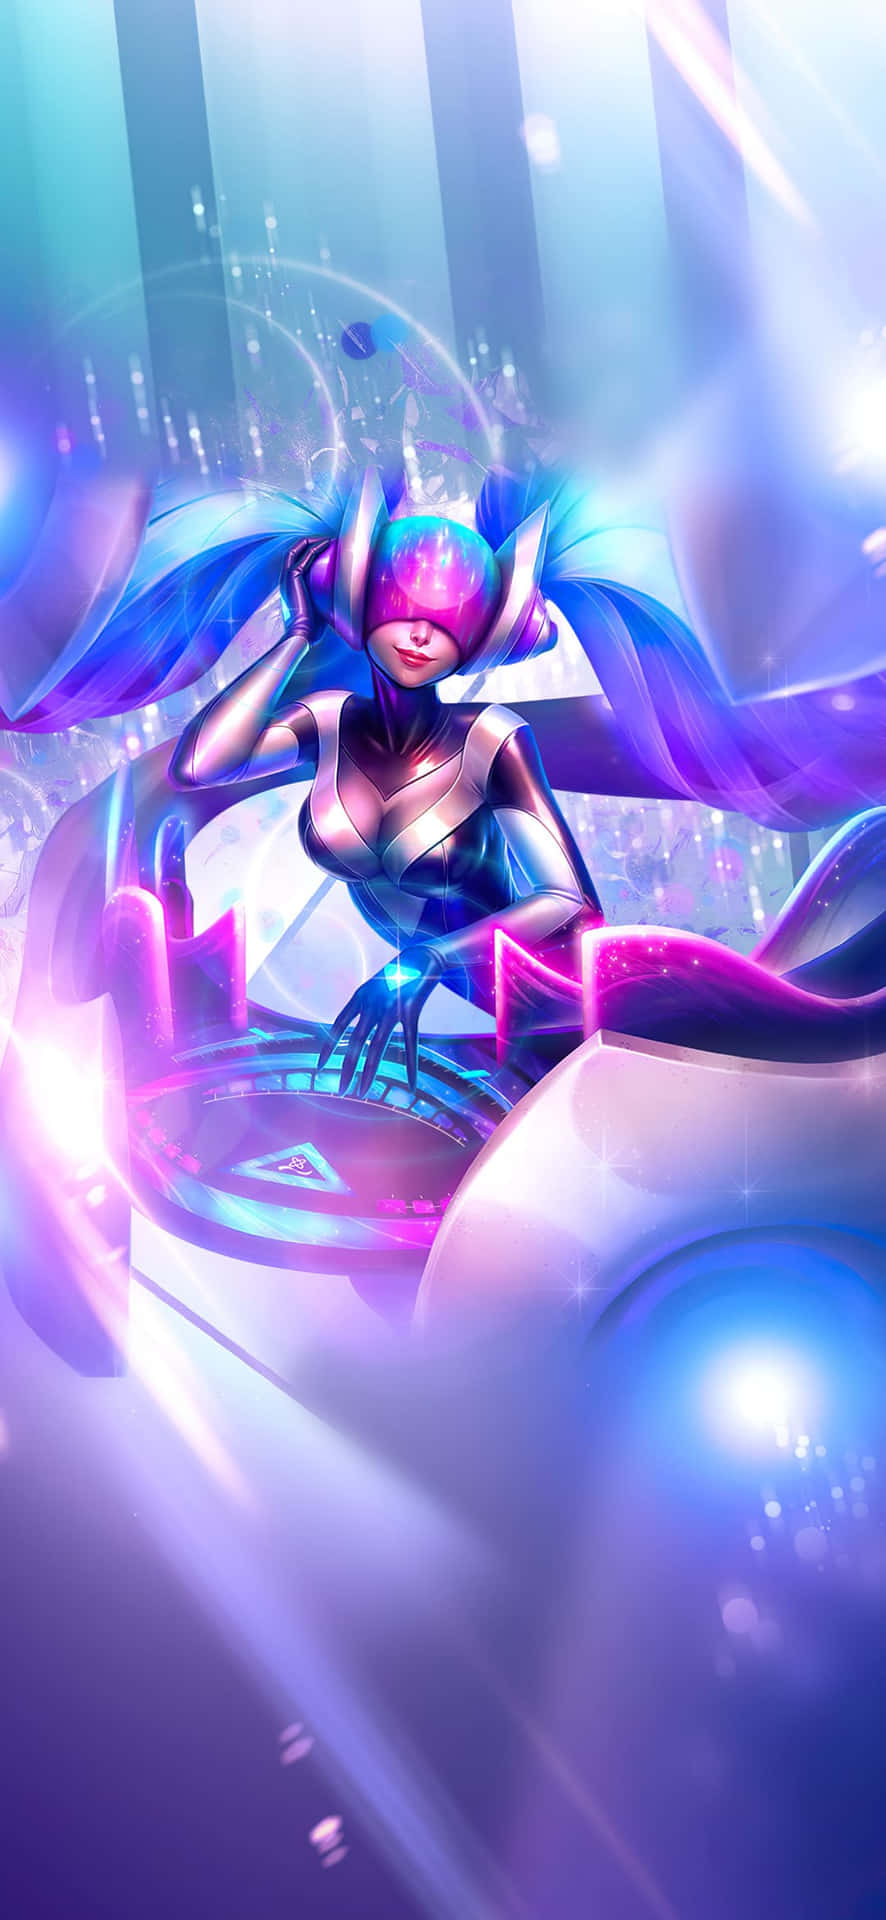 Pixel 3 League Of Legends Background And Dj Sona Background